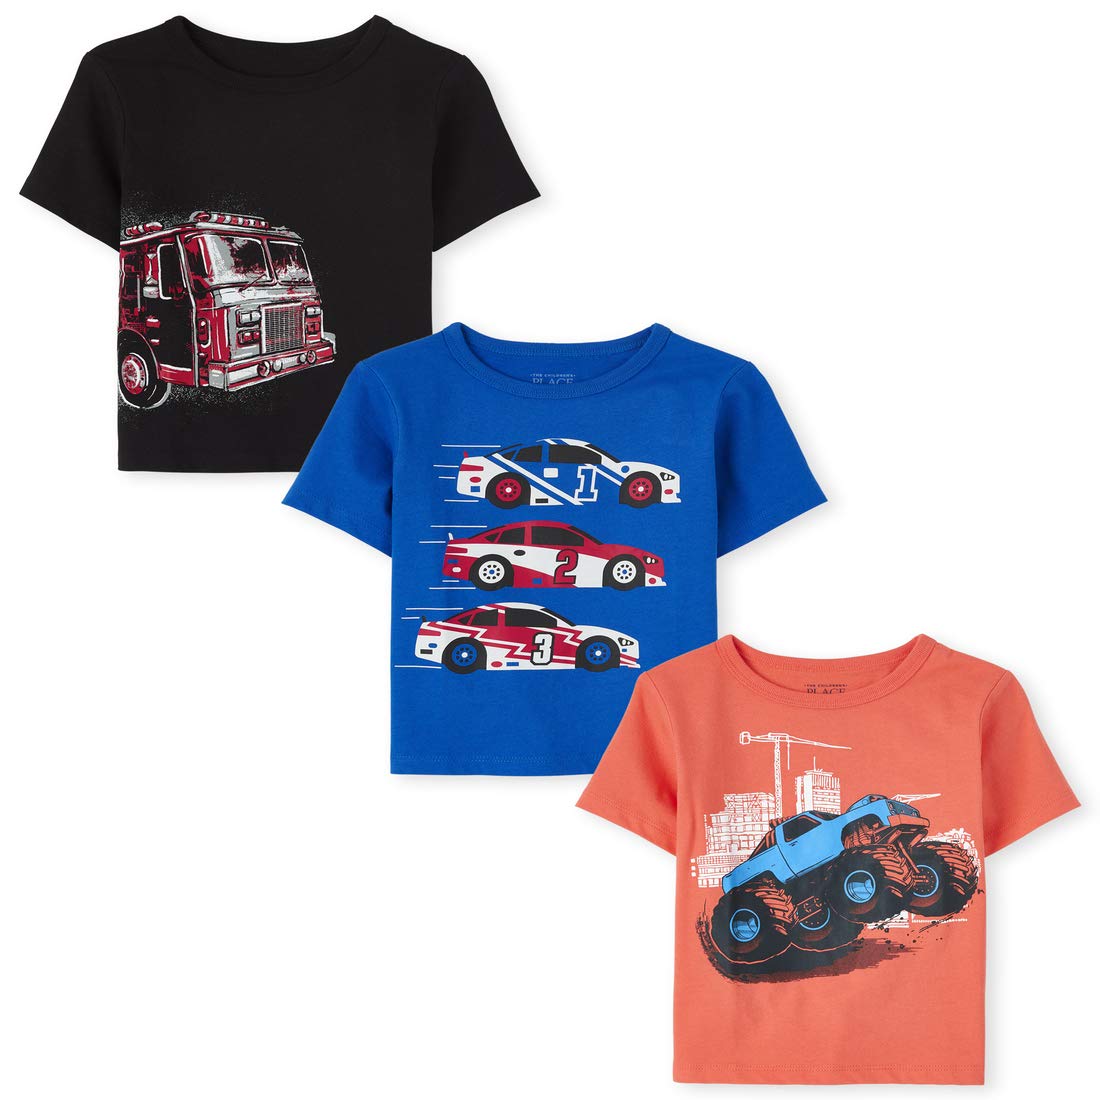 The Children's Place Baby Boys' and Toddler Girls Short Sleeve Graphic T-Shirts 3-Pack, Black Firetruck/Blue Race Car/Orange Monster Truck, 18-24 Months